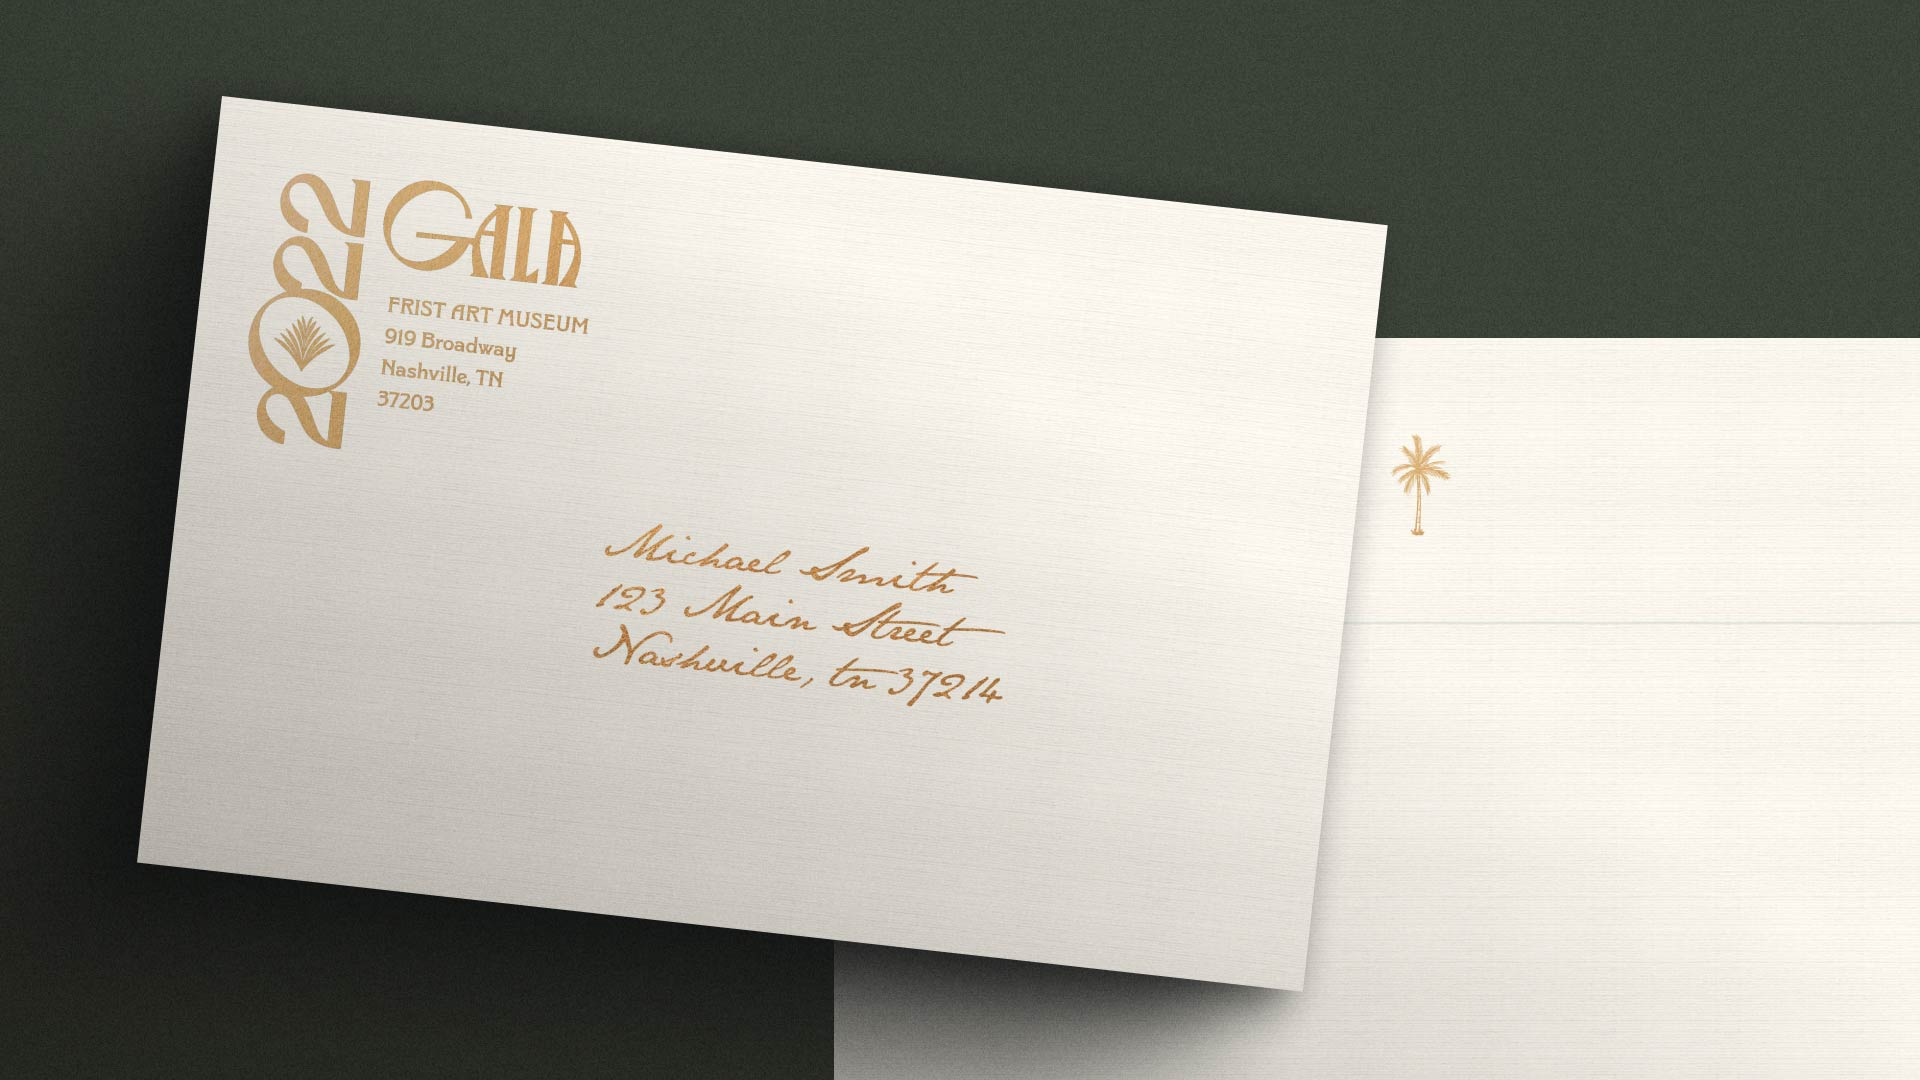 Photo of the 2022 First Gala envelope on a dark green background